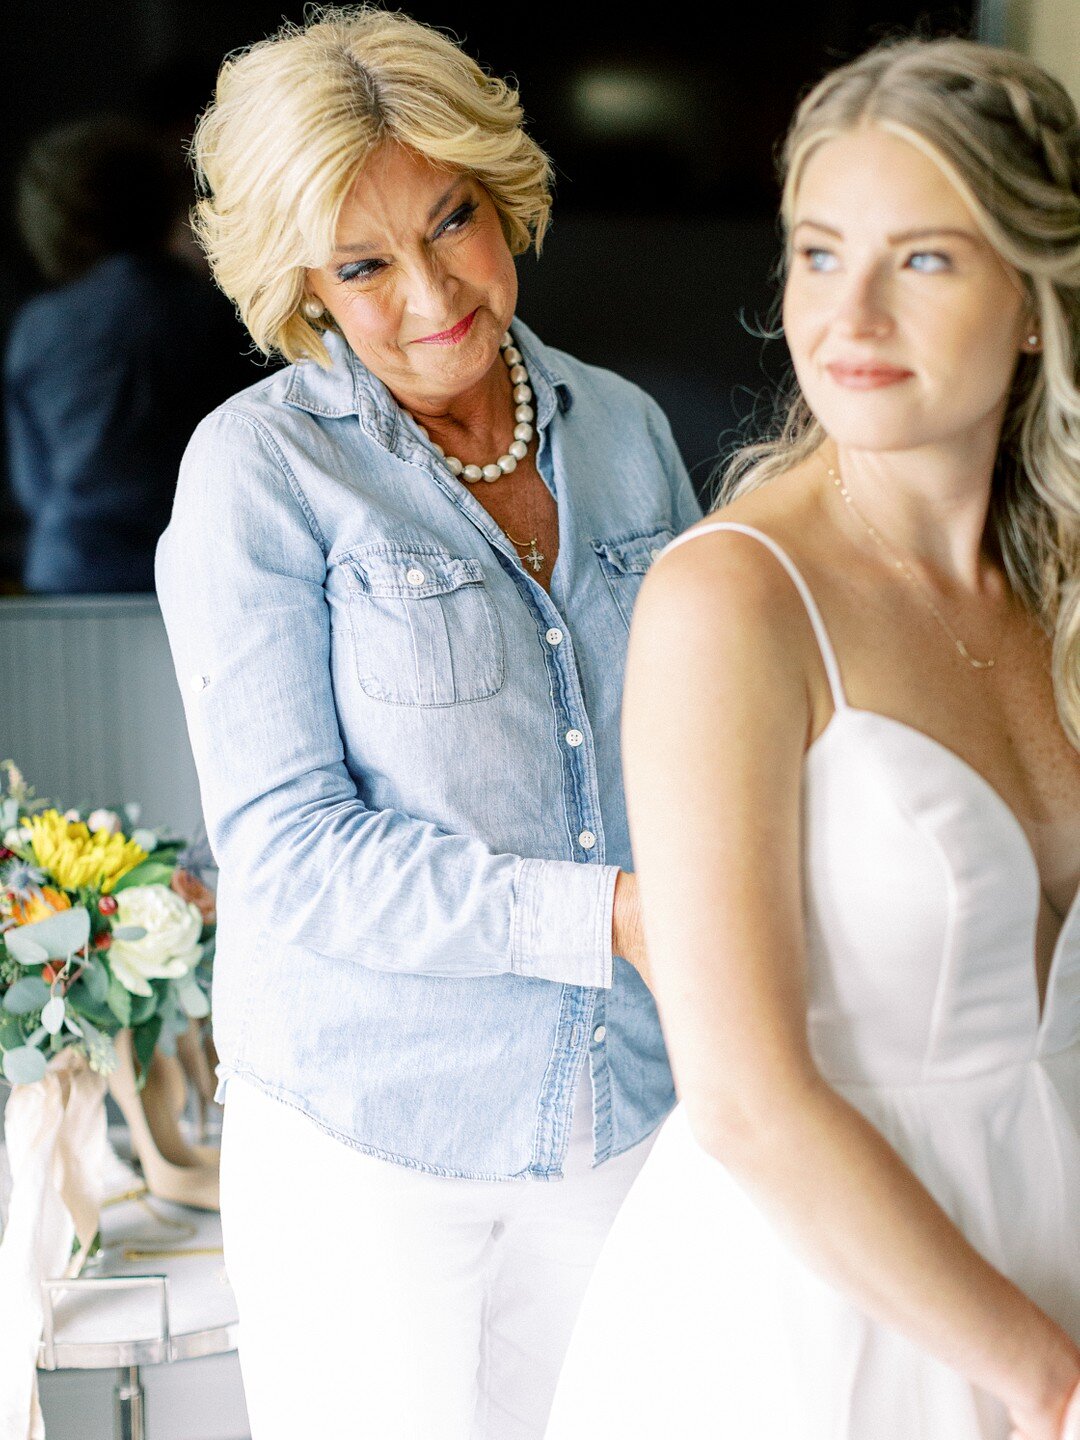 Romantic Cafe Brauer Wedding captured by Kaity Brawley Photography featured on CHI thee WED